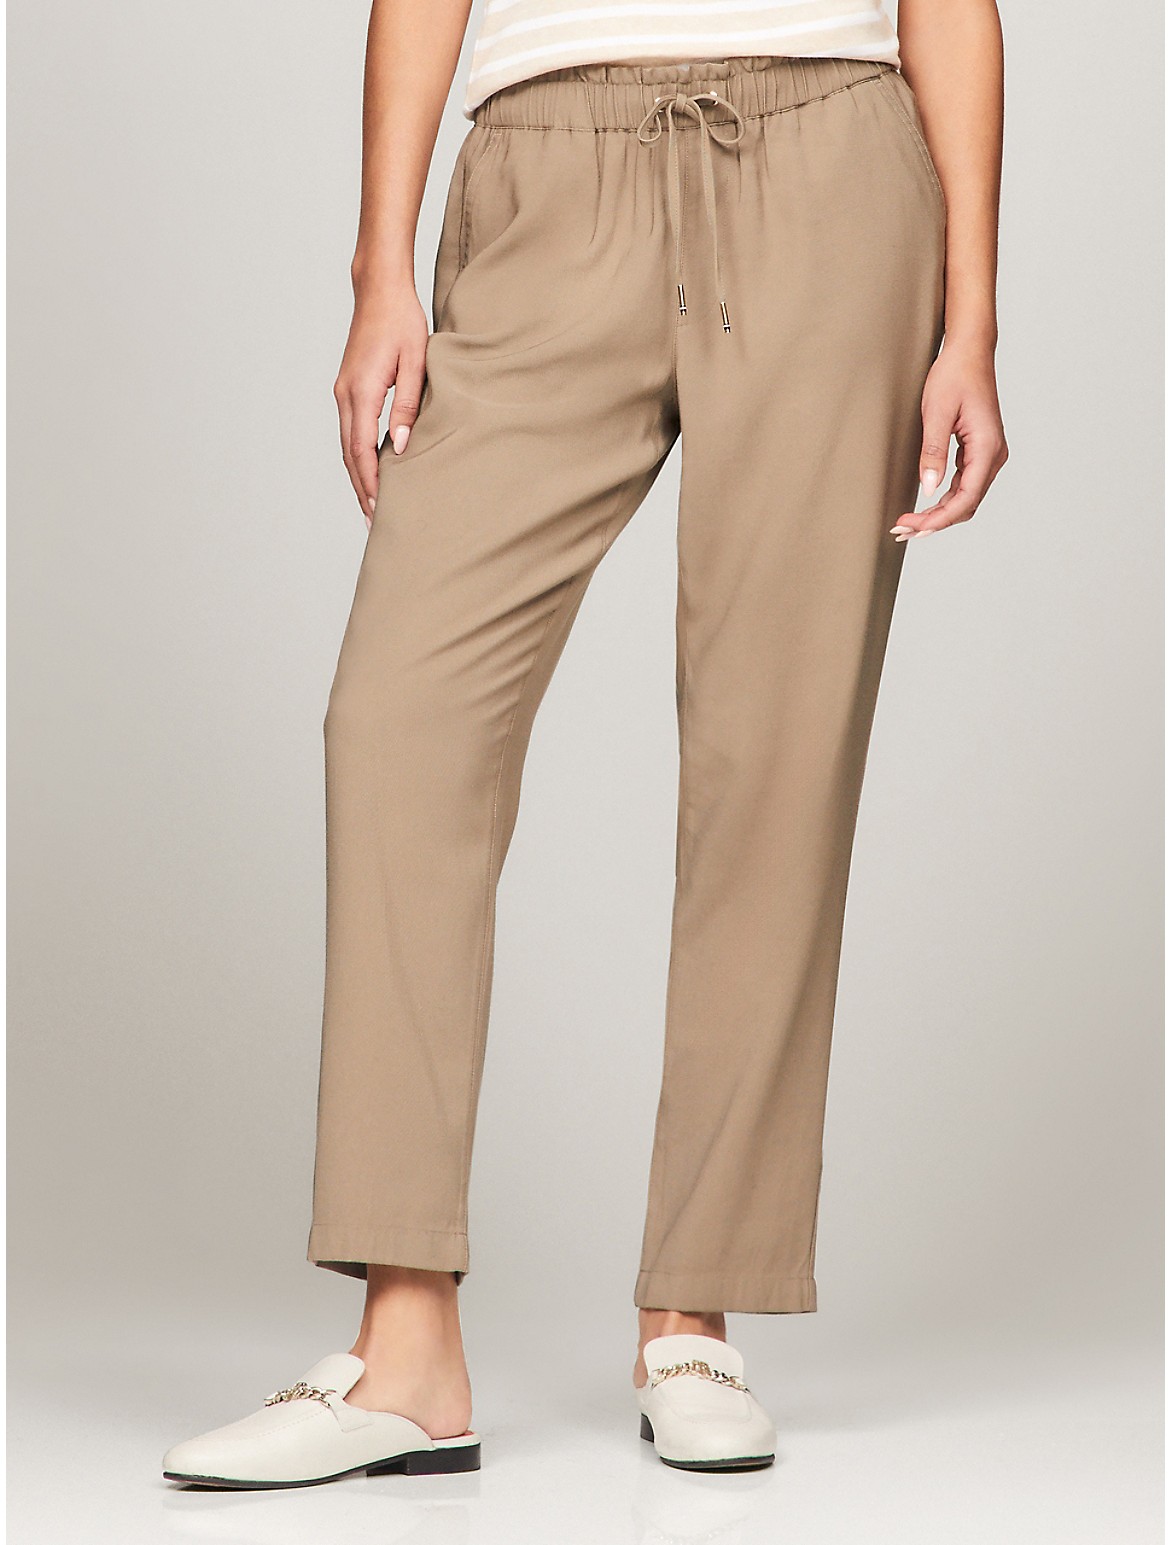 Tommy Hilfiger Women's Tapered Drawstring Pant